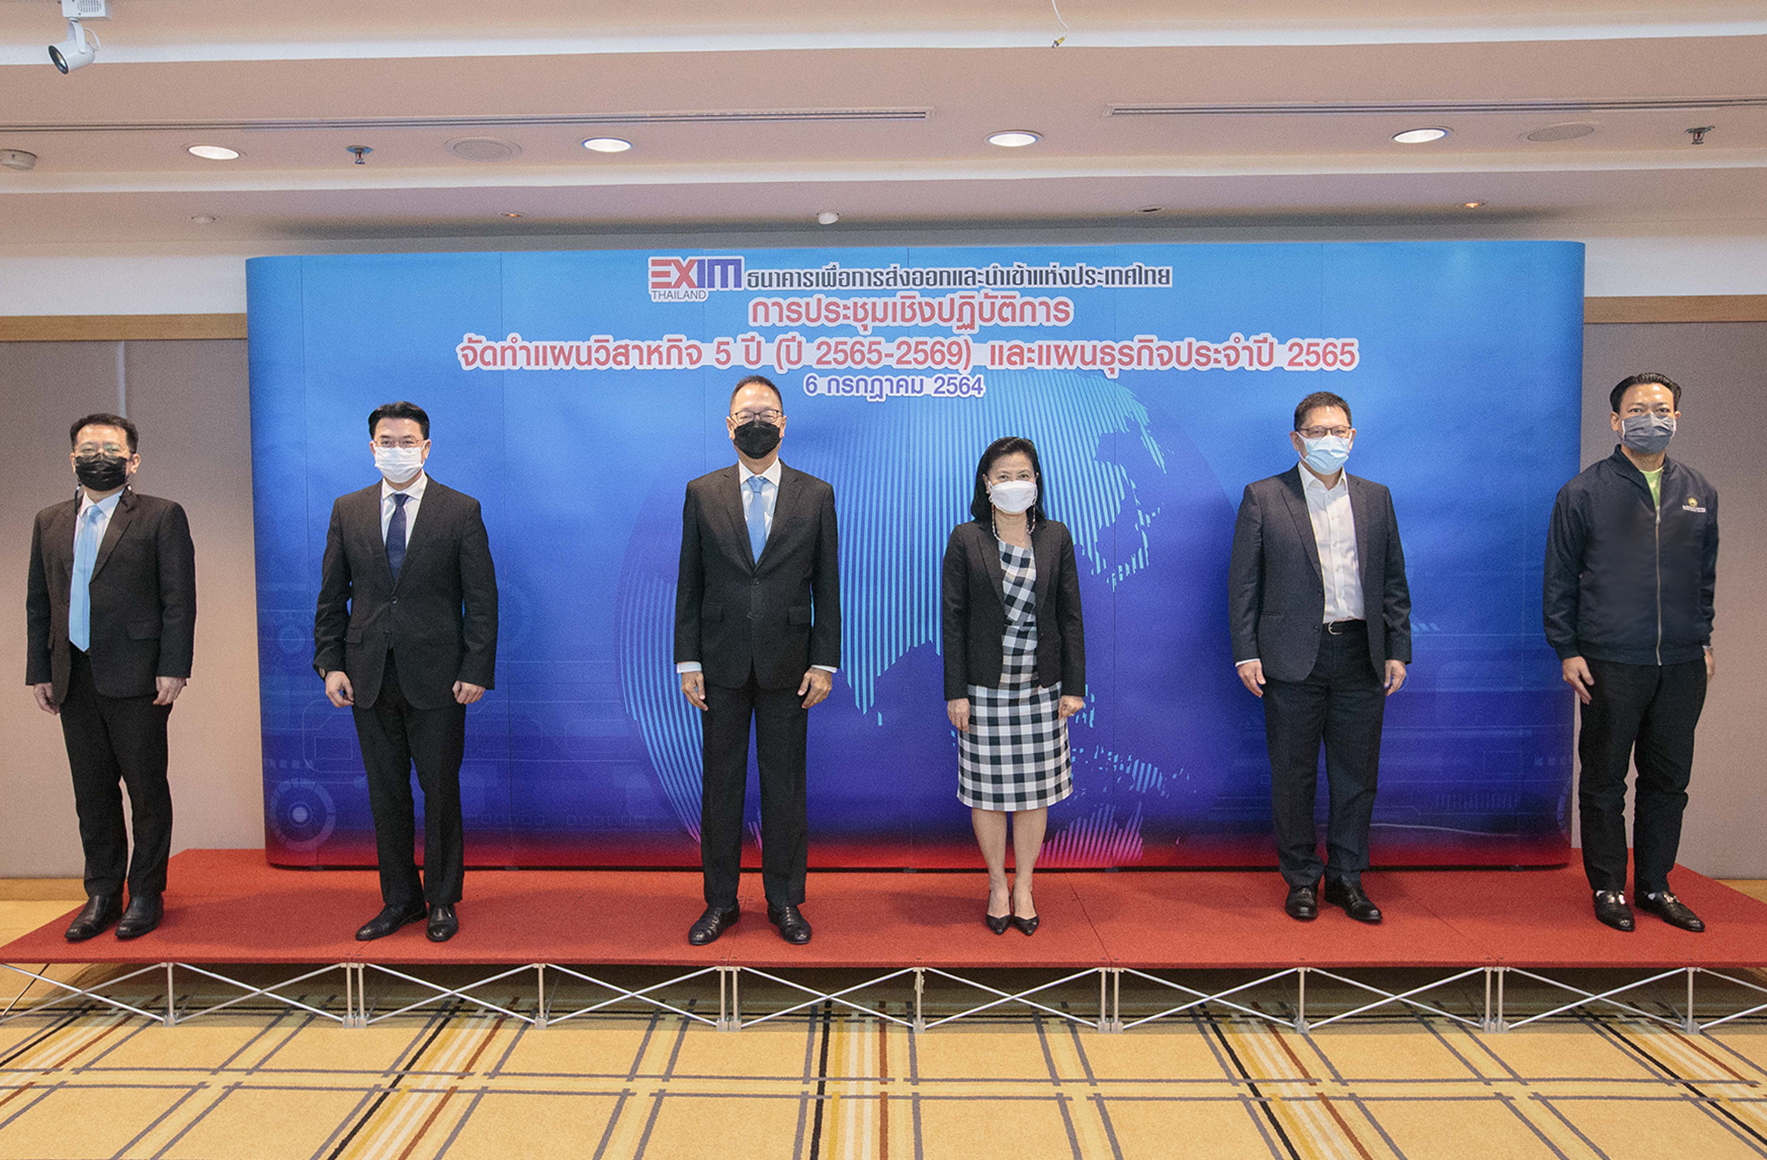 EXIM Thailand Holds Workshop on 5-year Enterprise Plan (2022-2026) and Business Plan 2022